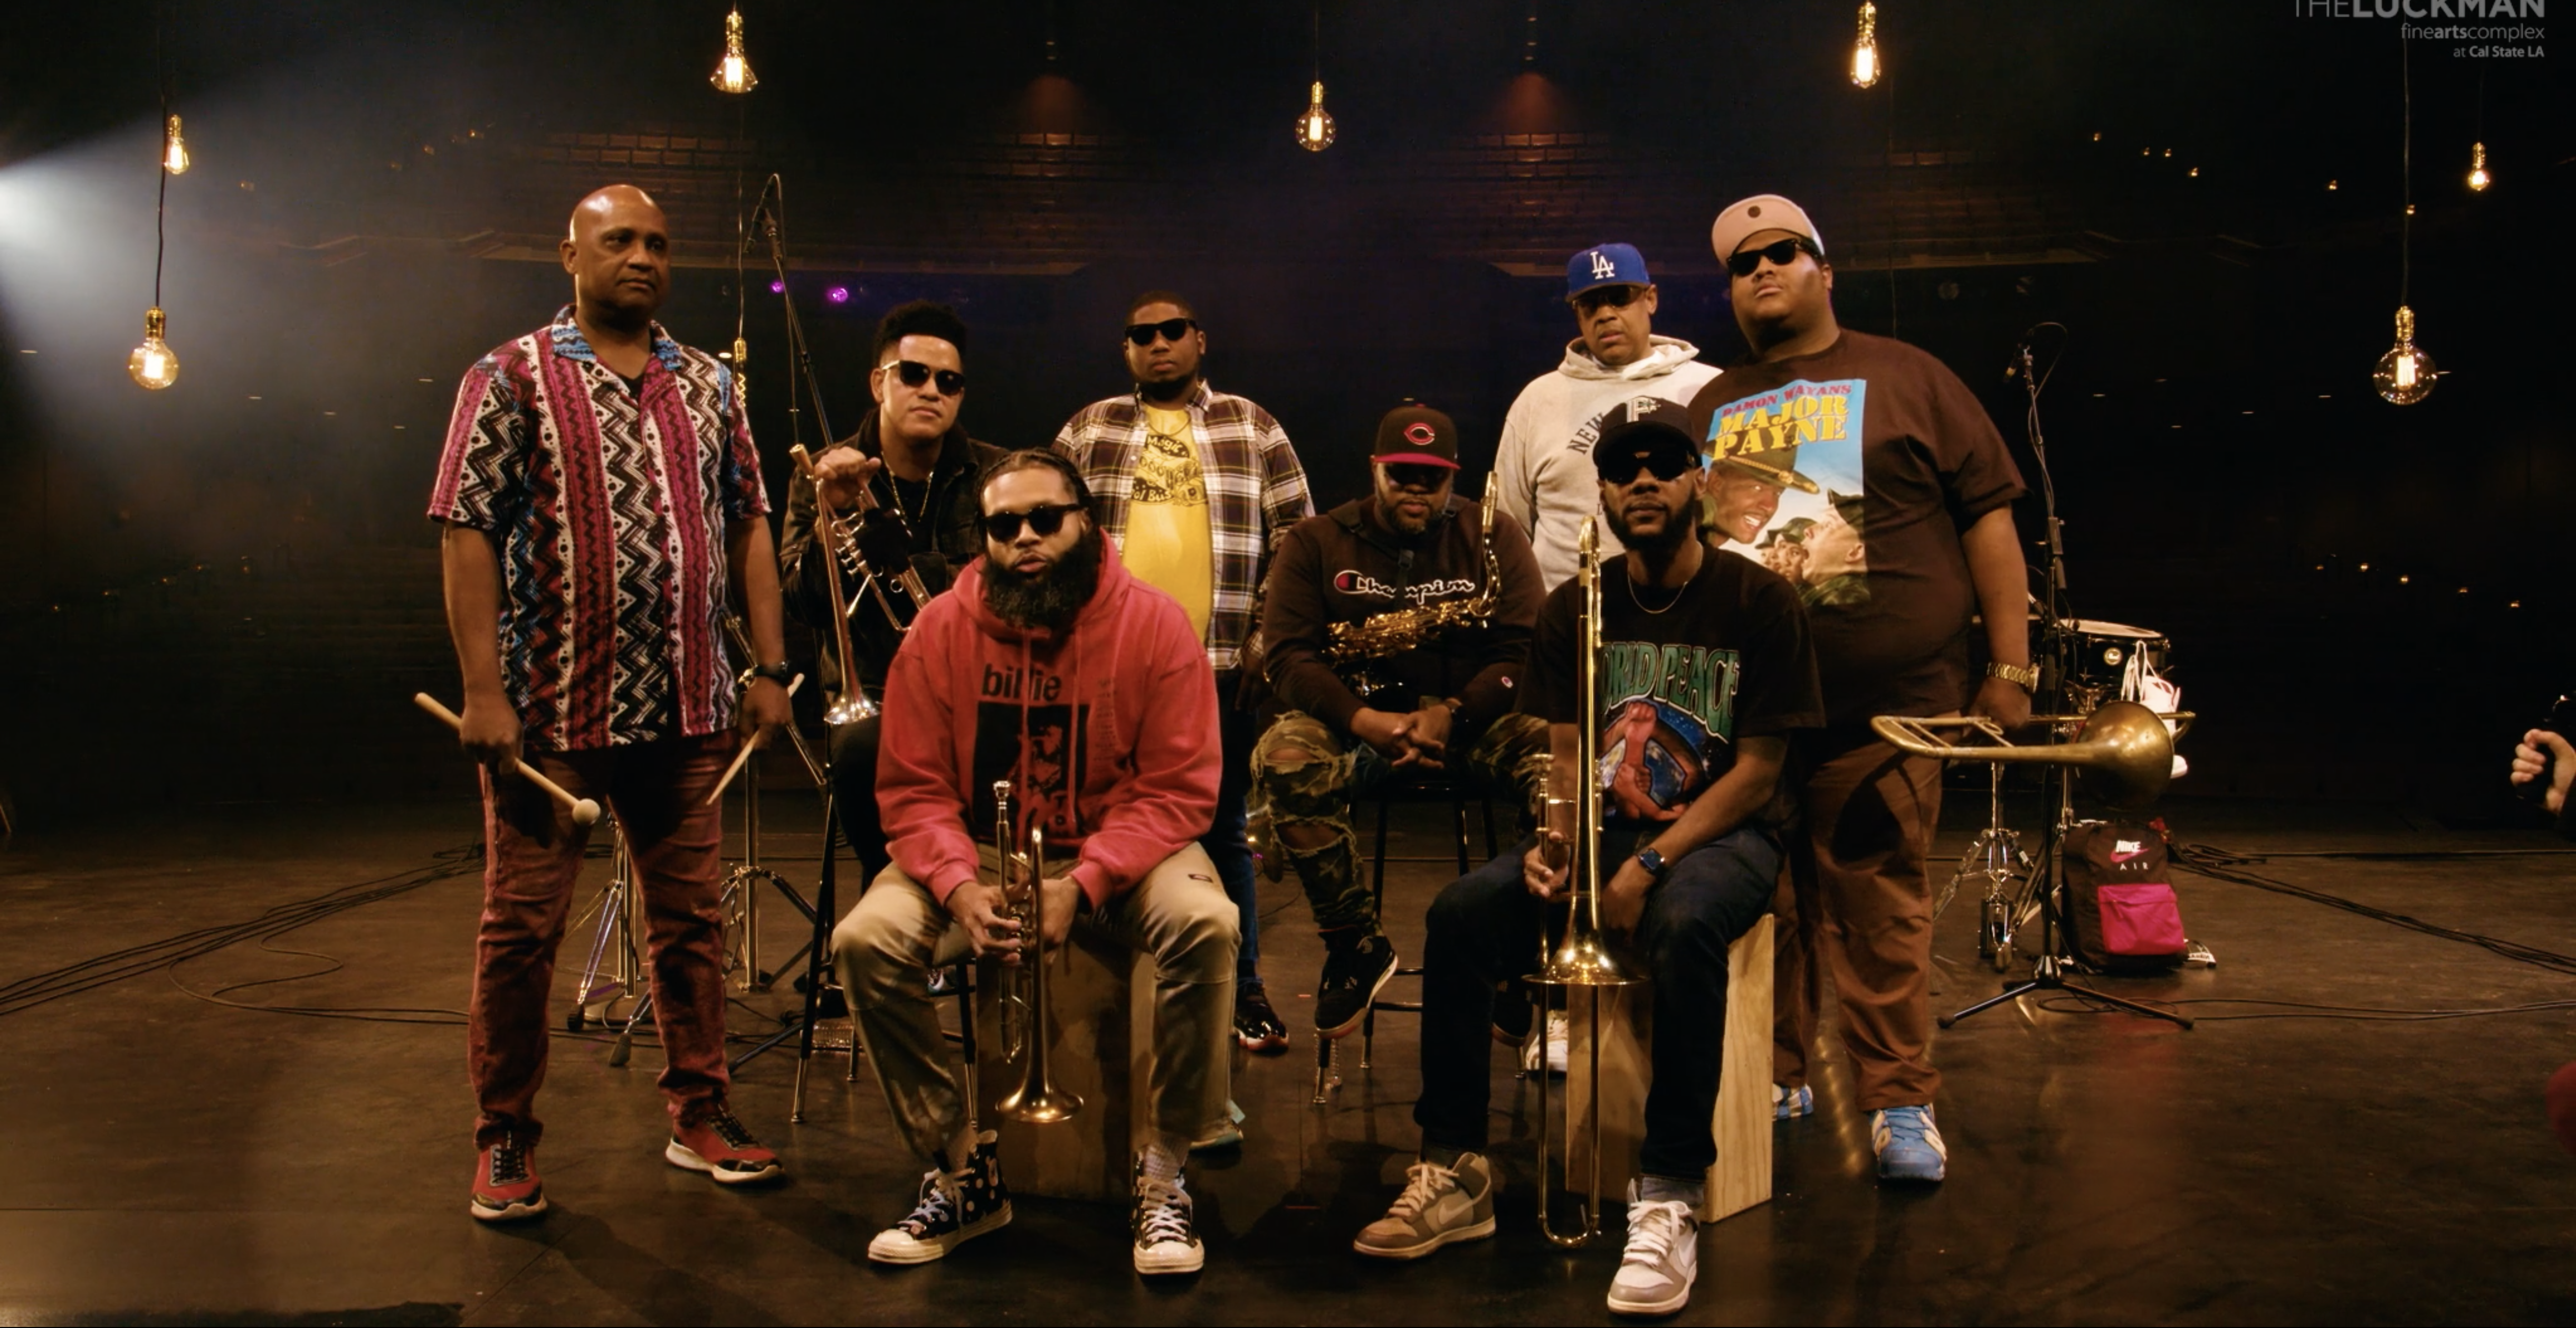 The Soul Rebels posing on a theater stage with hanging lights in background.